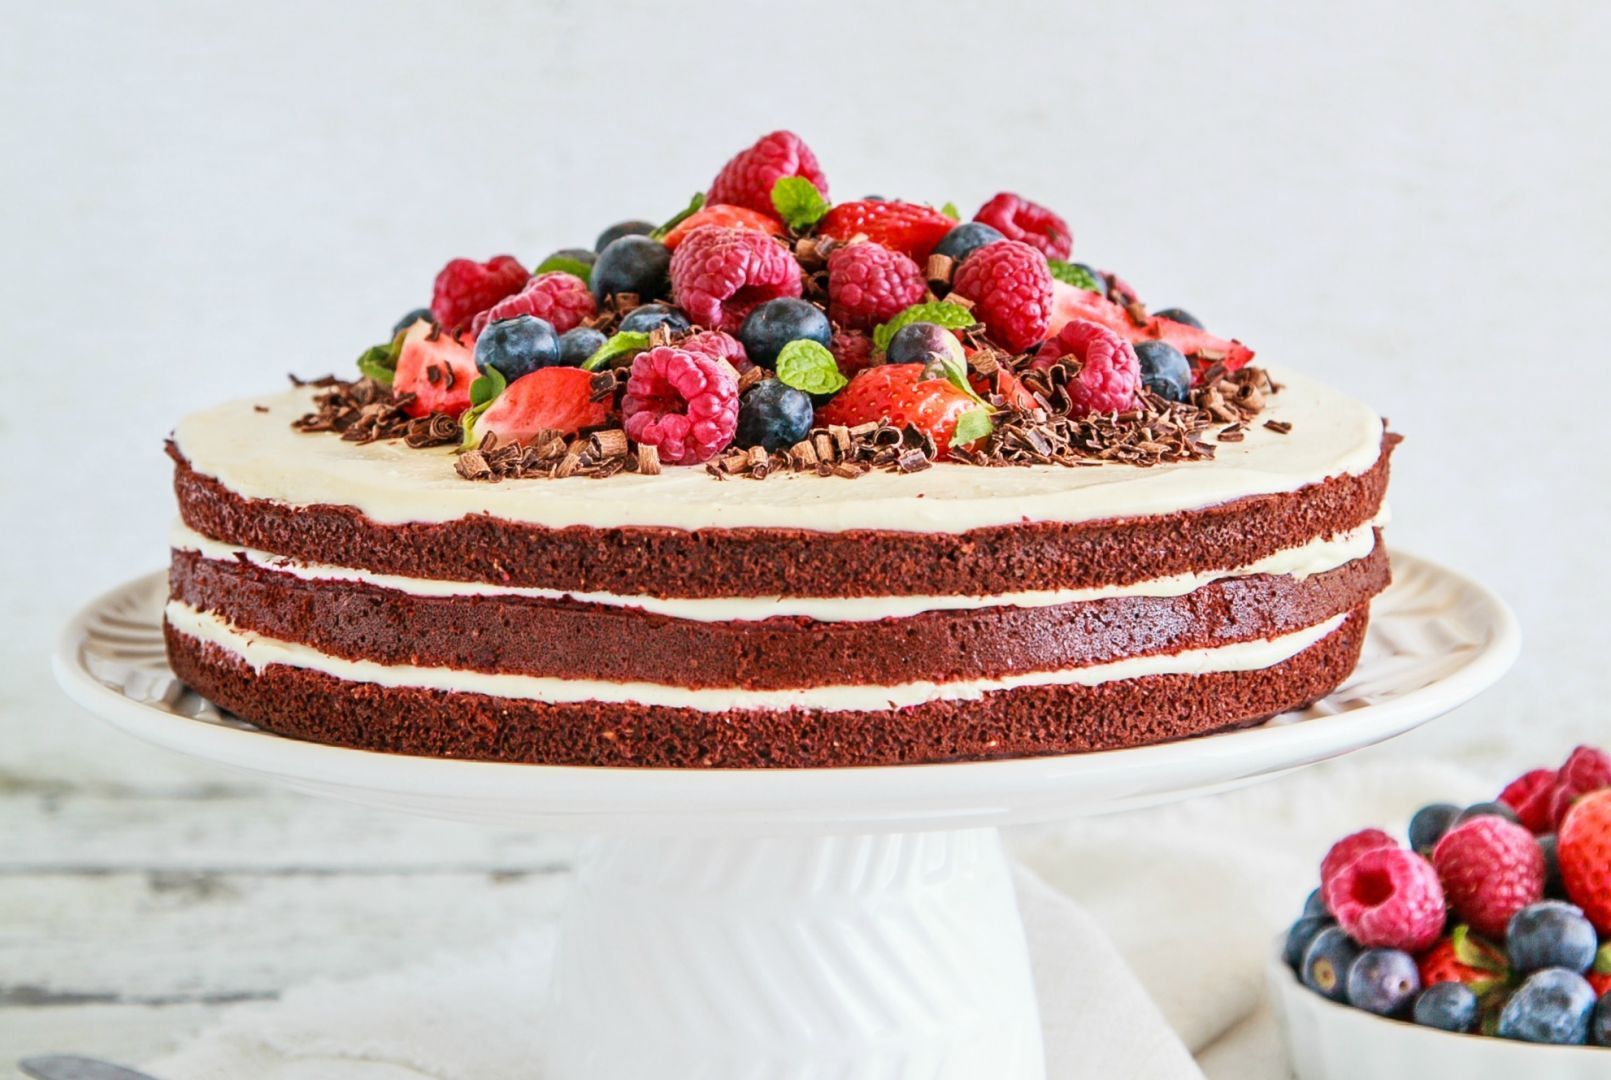 Healthy Birthday Cakes
 Our Top Ten Healthy Birthday Cakes